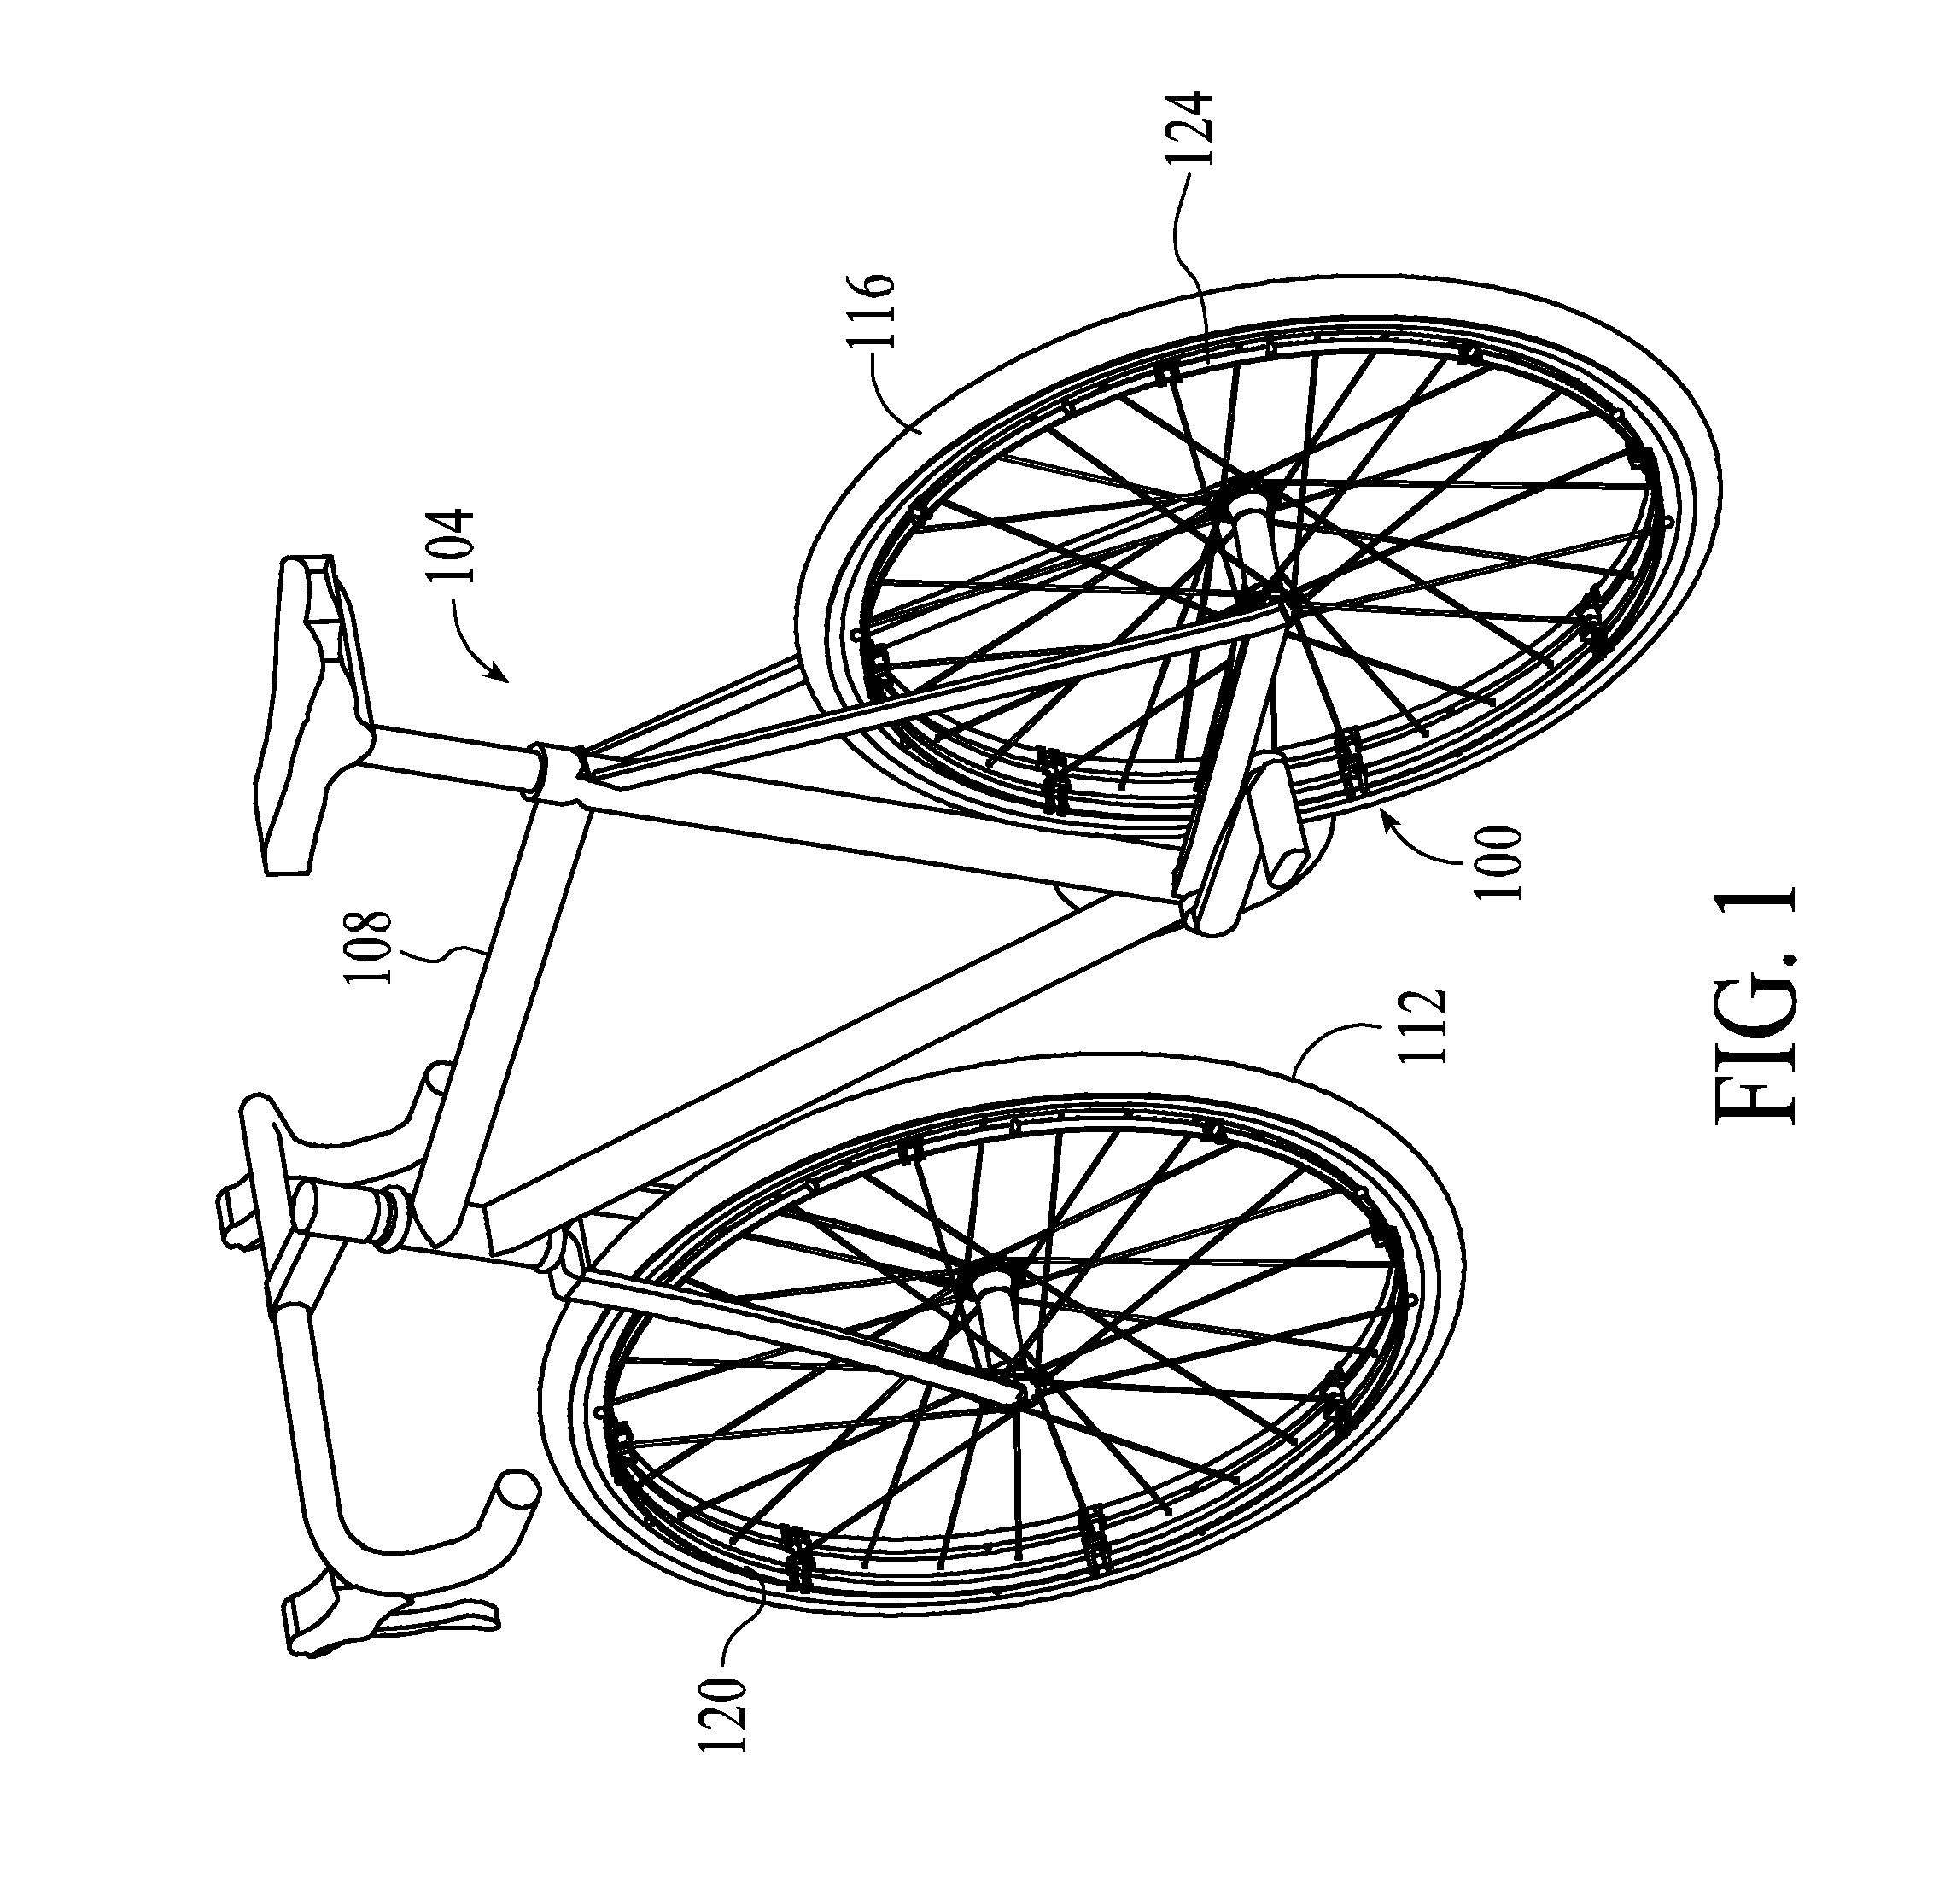 Bicycle lighting systems and methods